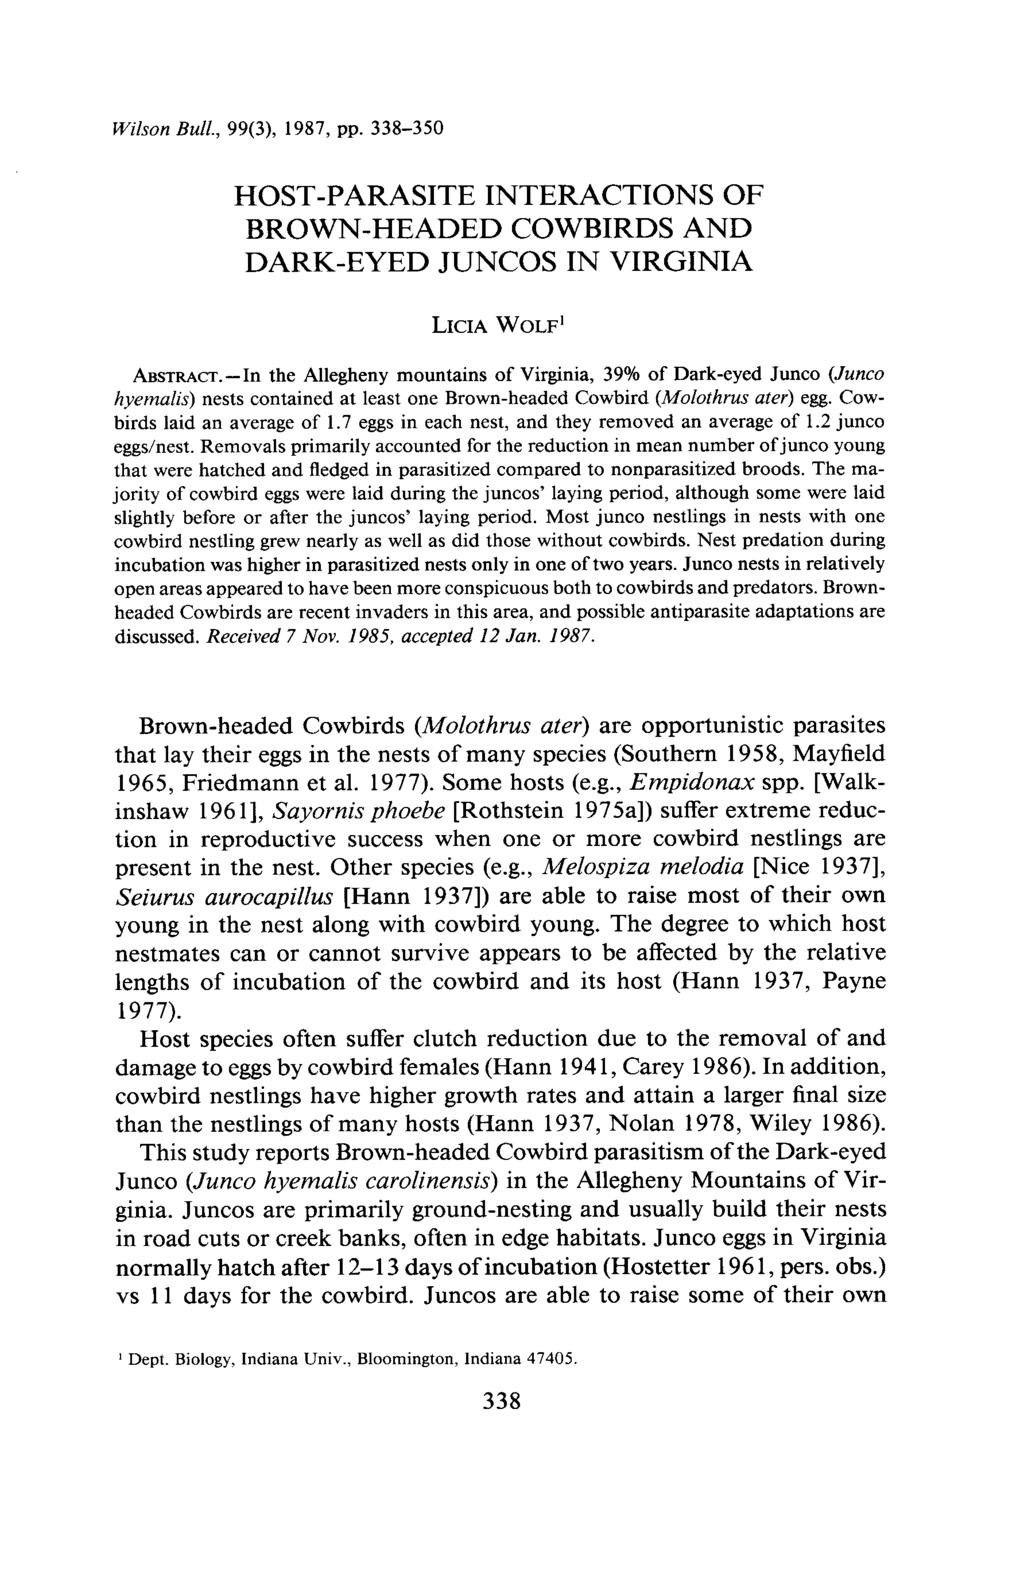 Wilson Bull., 99(3), 1987, pp. 338-350 HOST-PARASITE INTERACTIONS OF BROWN-HEADED COWBIRDS AND DARK-EYED JUNCOS IN VIRGINIA LICIA WOLF ABSTRACT.